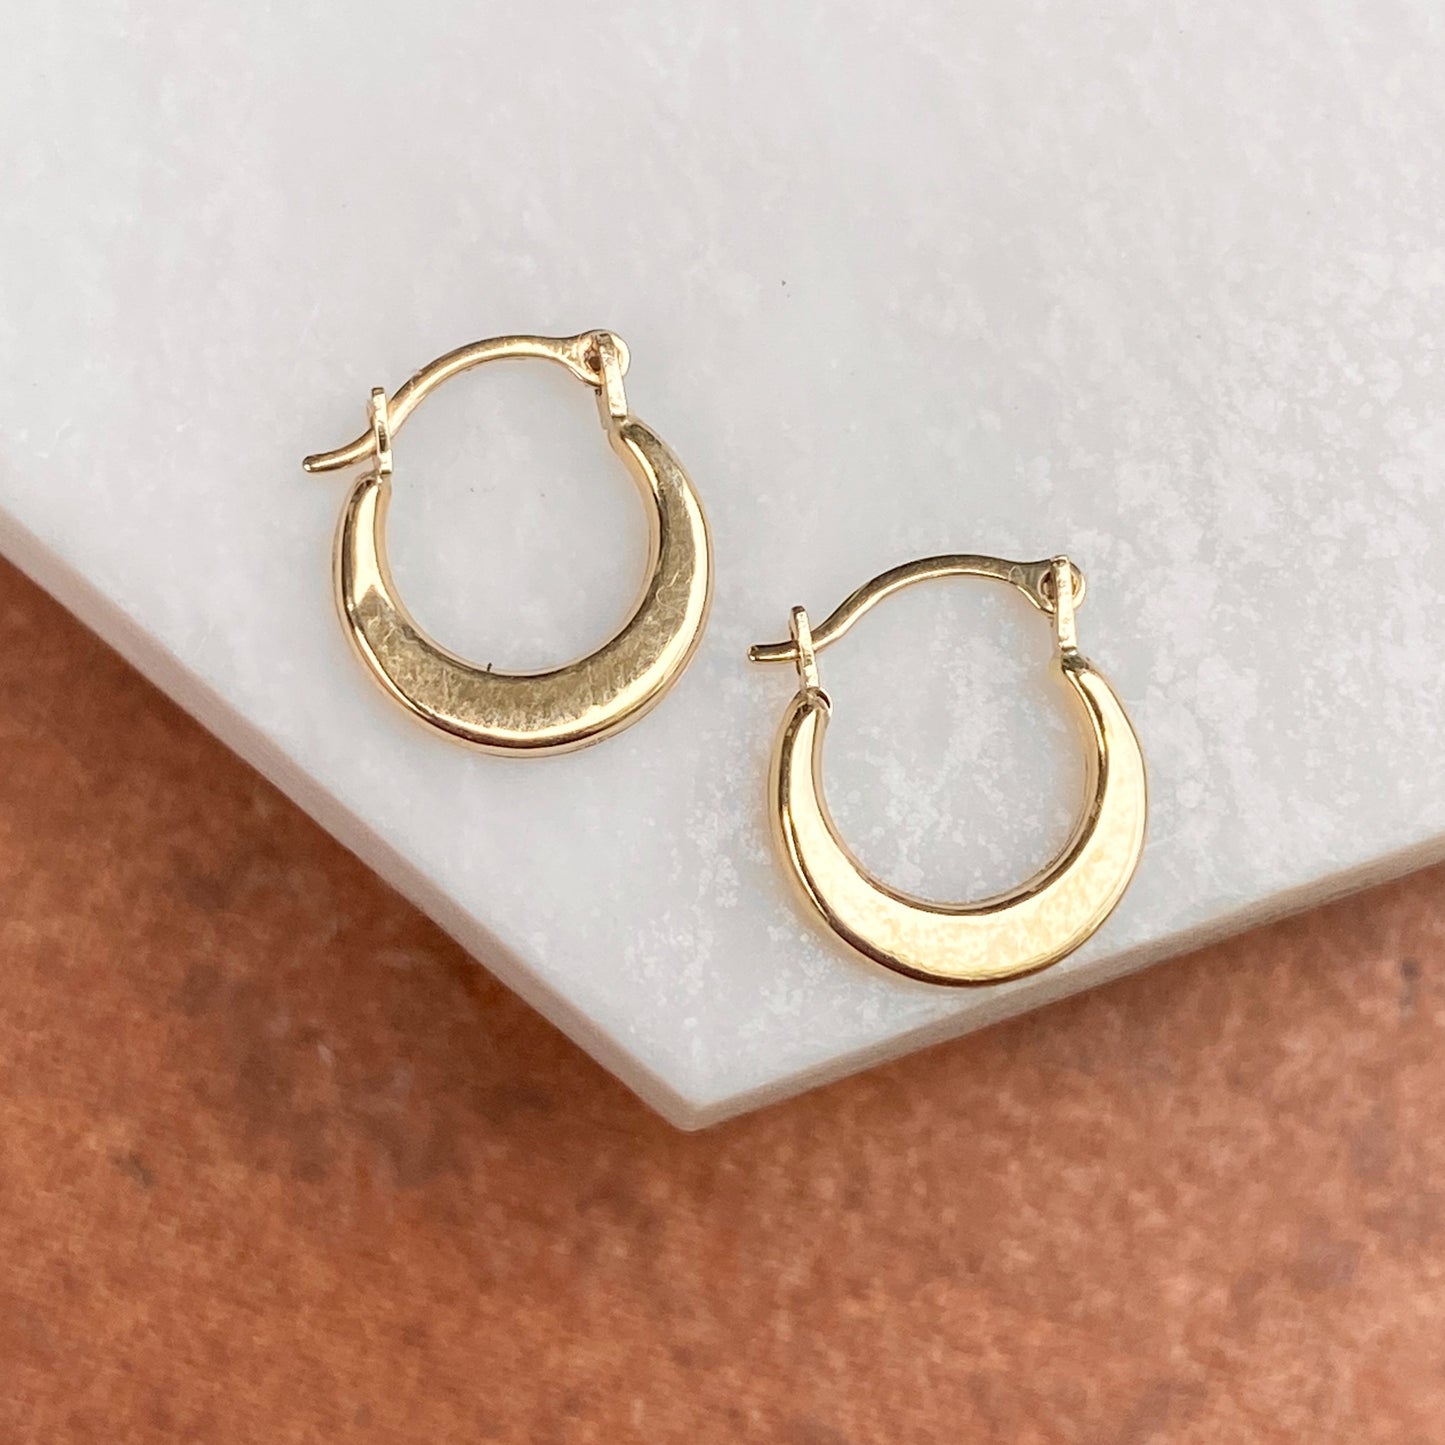 14KT Yellow Gold Polished Mini Hollow Hoop Earrings 10mm, 14KT Yellow Gold Polished Mini Hollow Hoop Earrings 10mm - Legacy Saint Jewelry